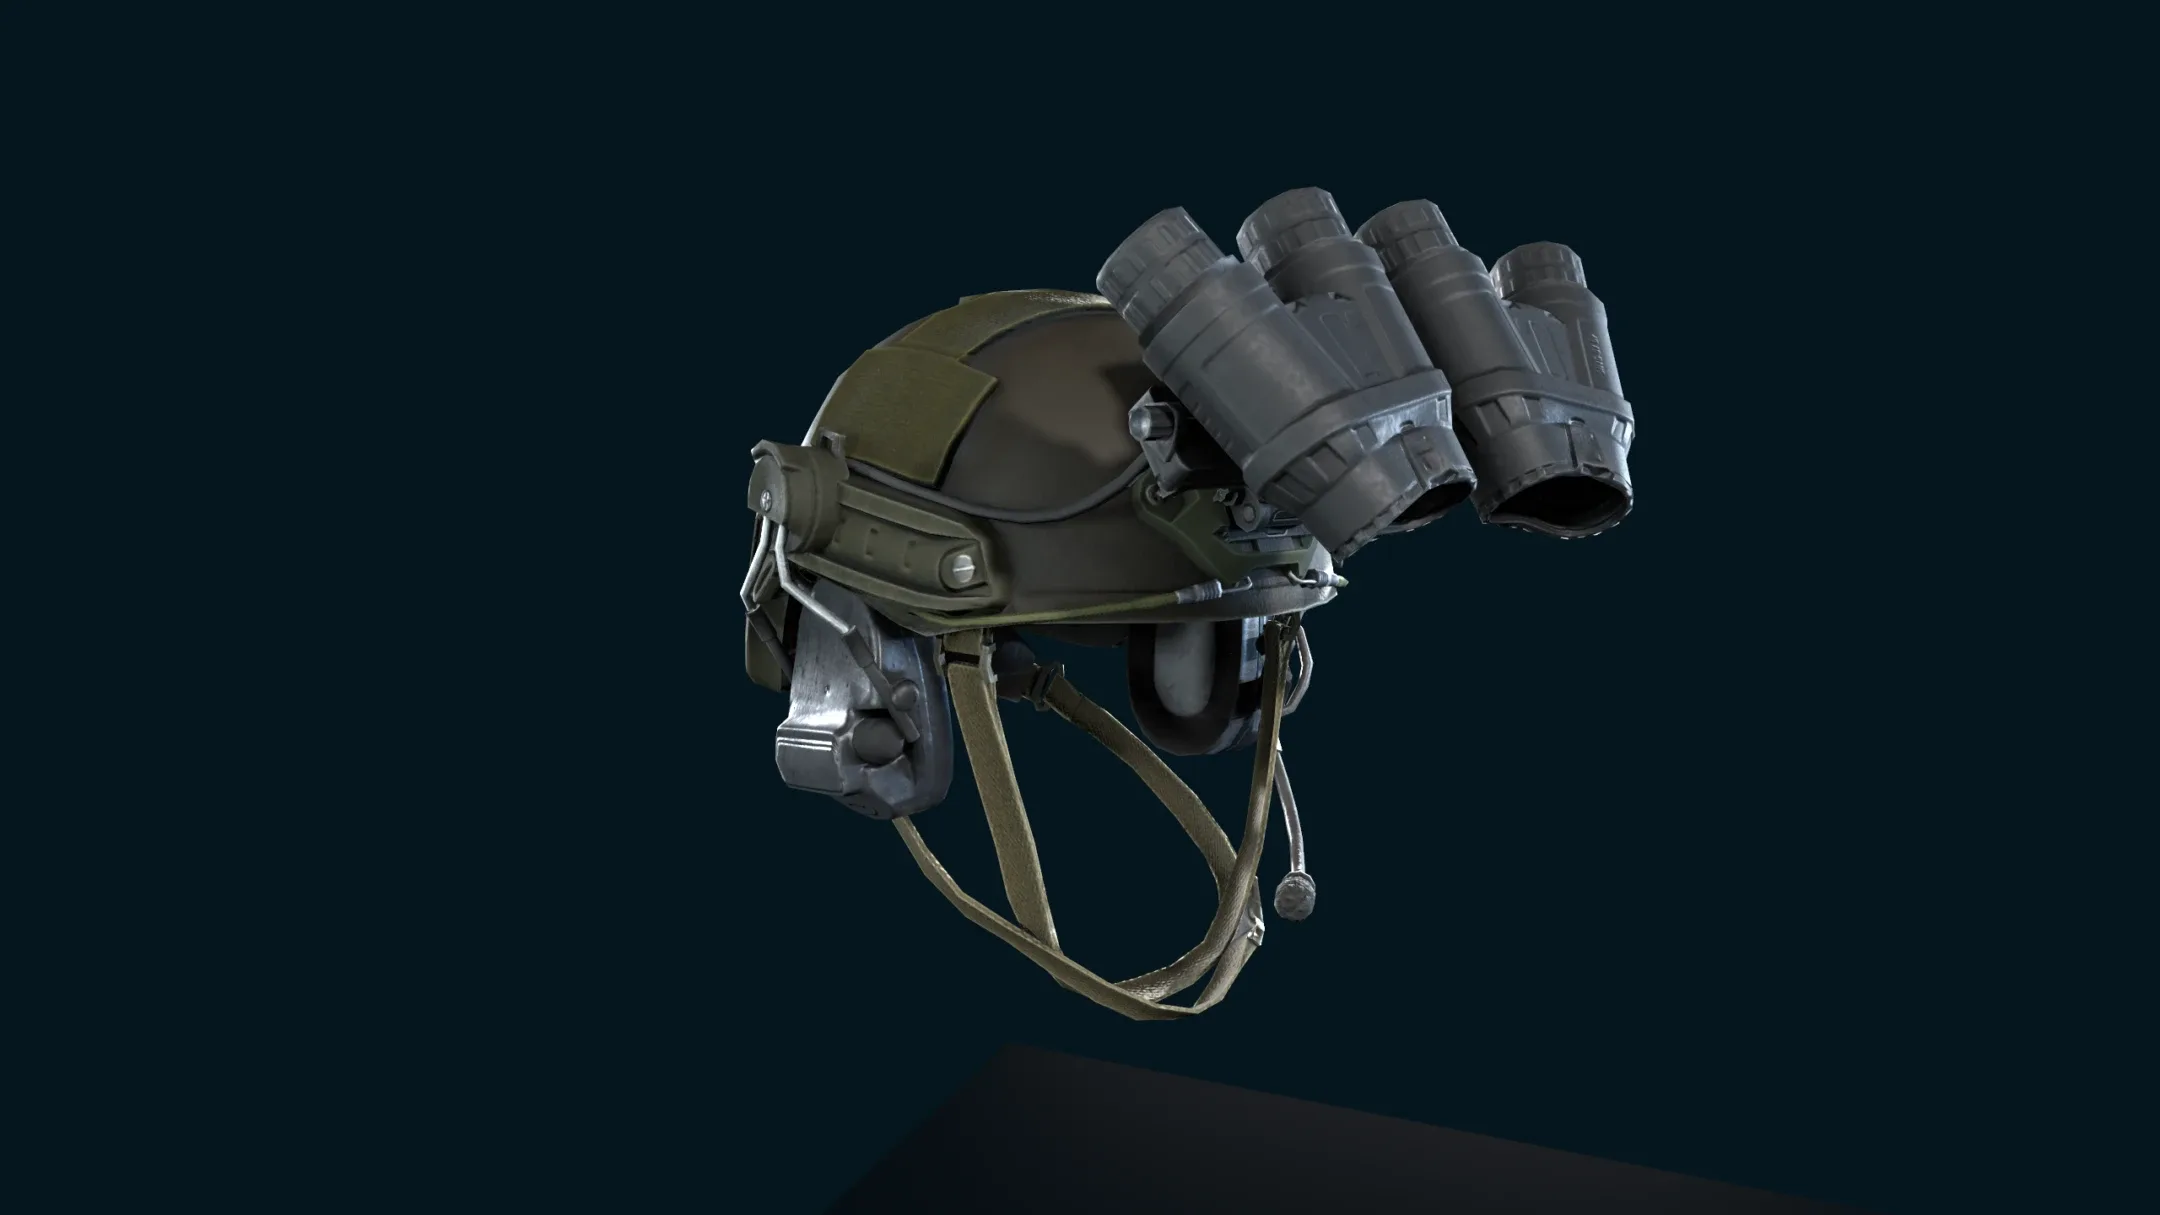 Military Light Helmet with Night Vision Goggles